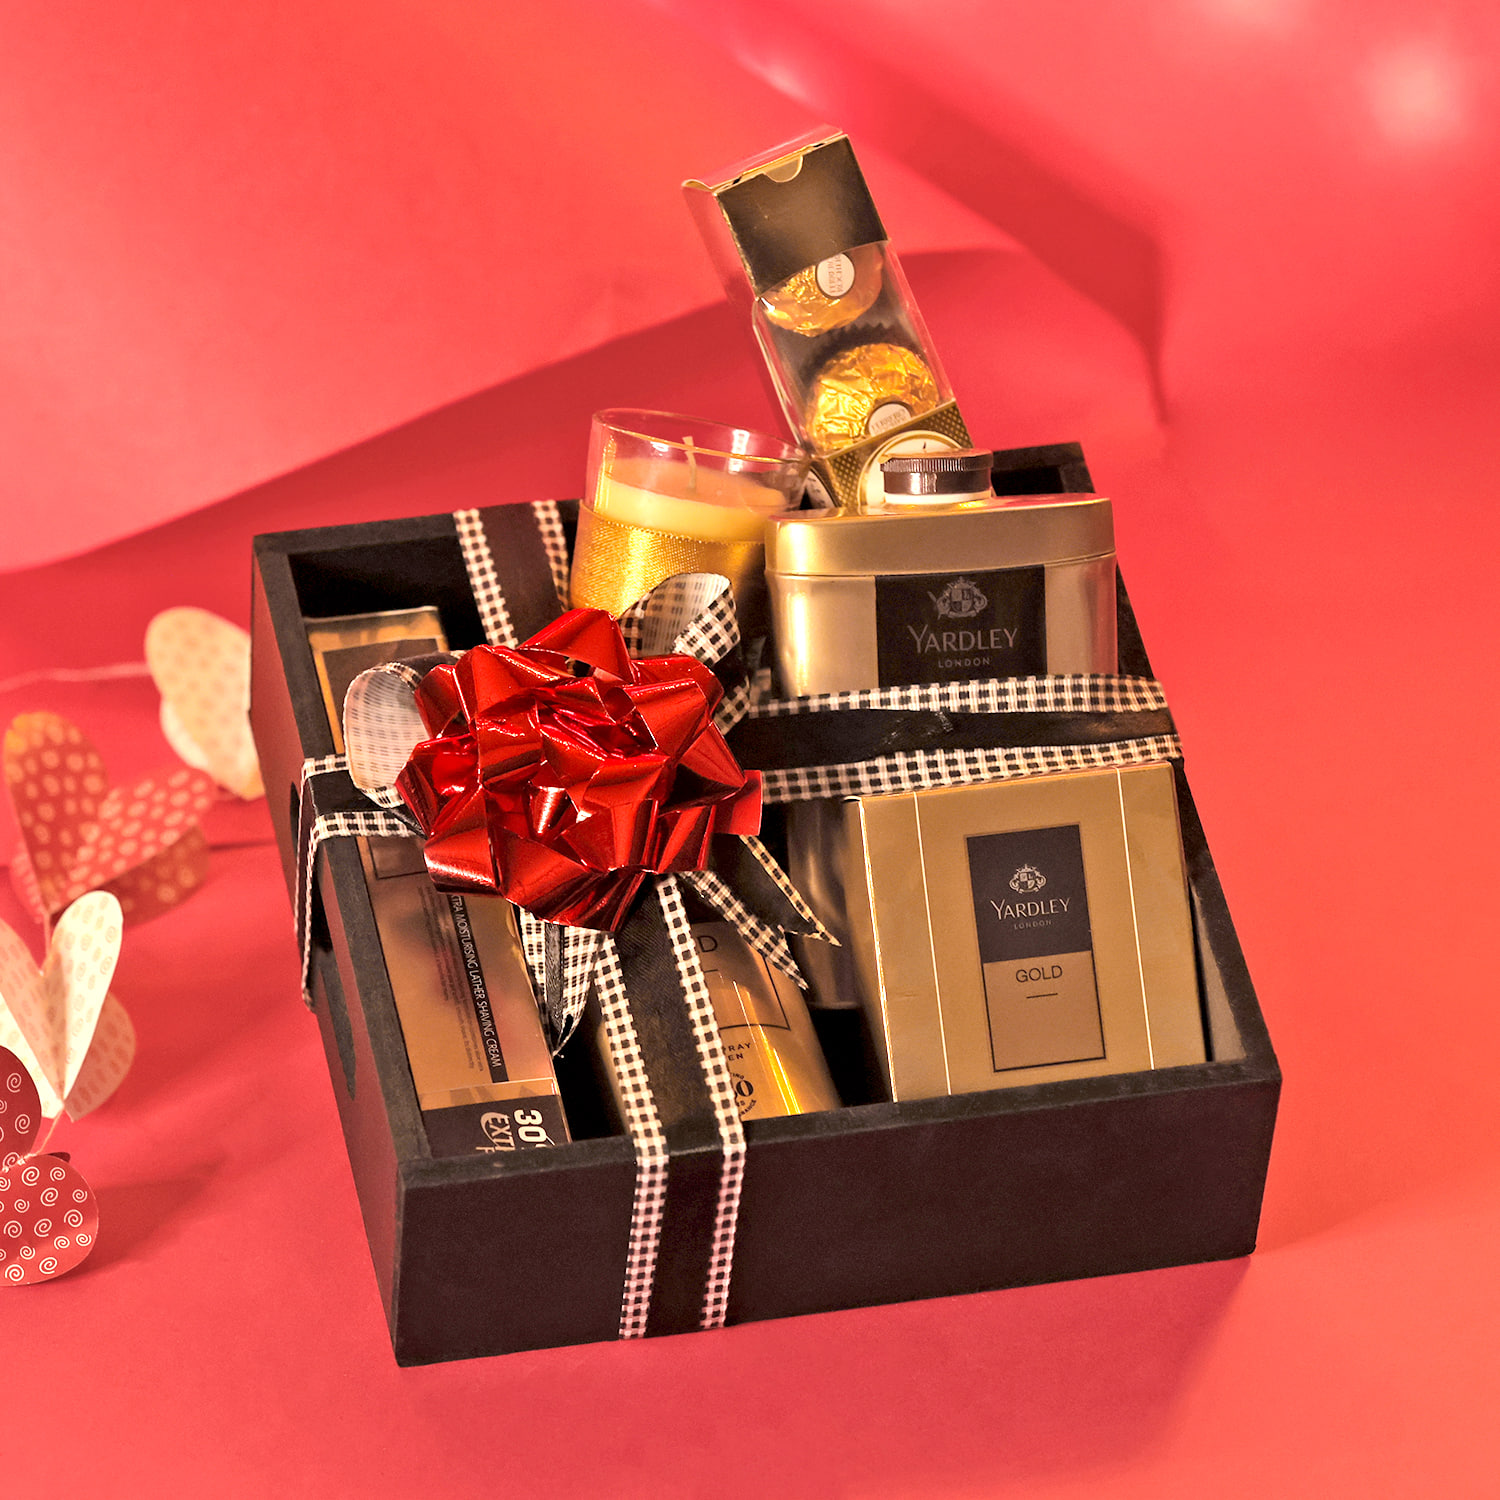 Christmas Fruits Gift Baskets to Pune | Send Plum Cakes, Gourmet Baskets  Online | Low Cost